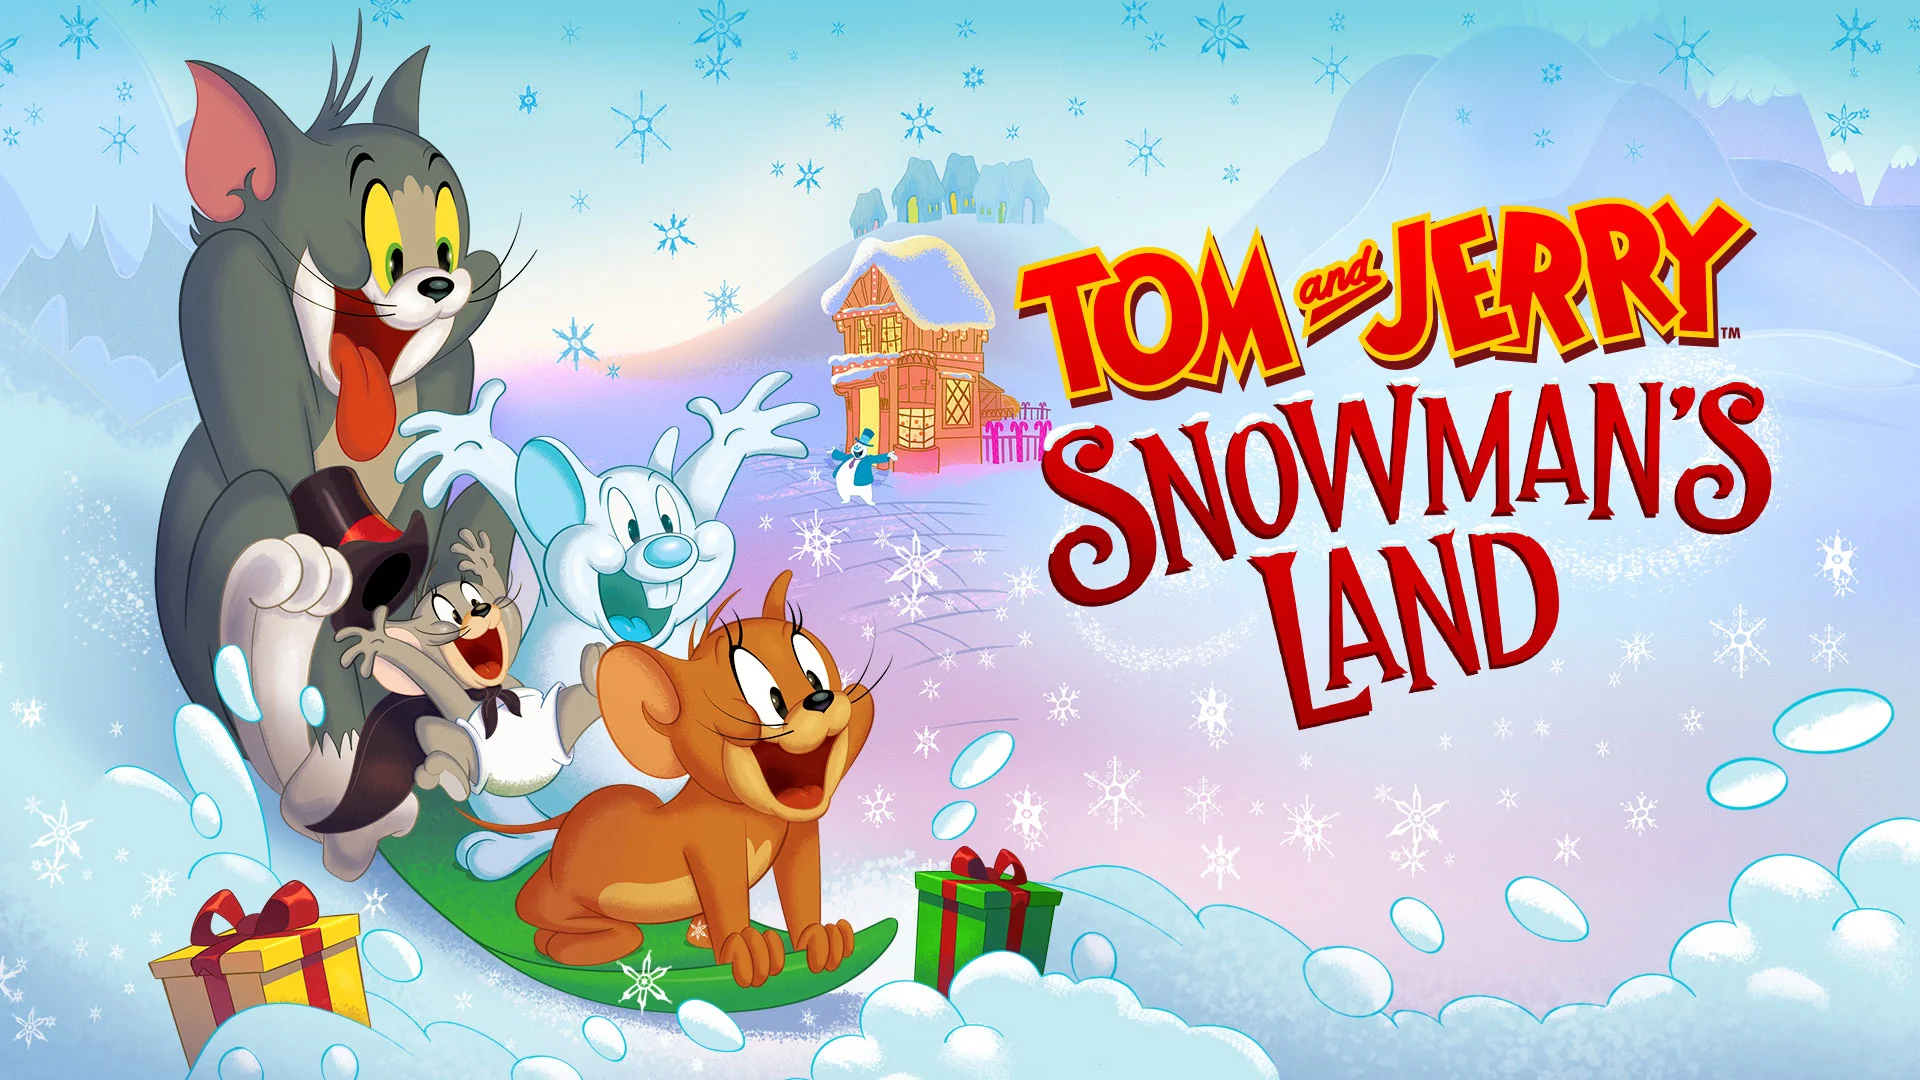 Tom and Jerry: Snowman's land